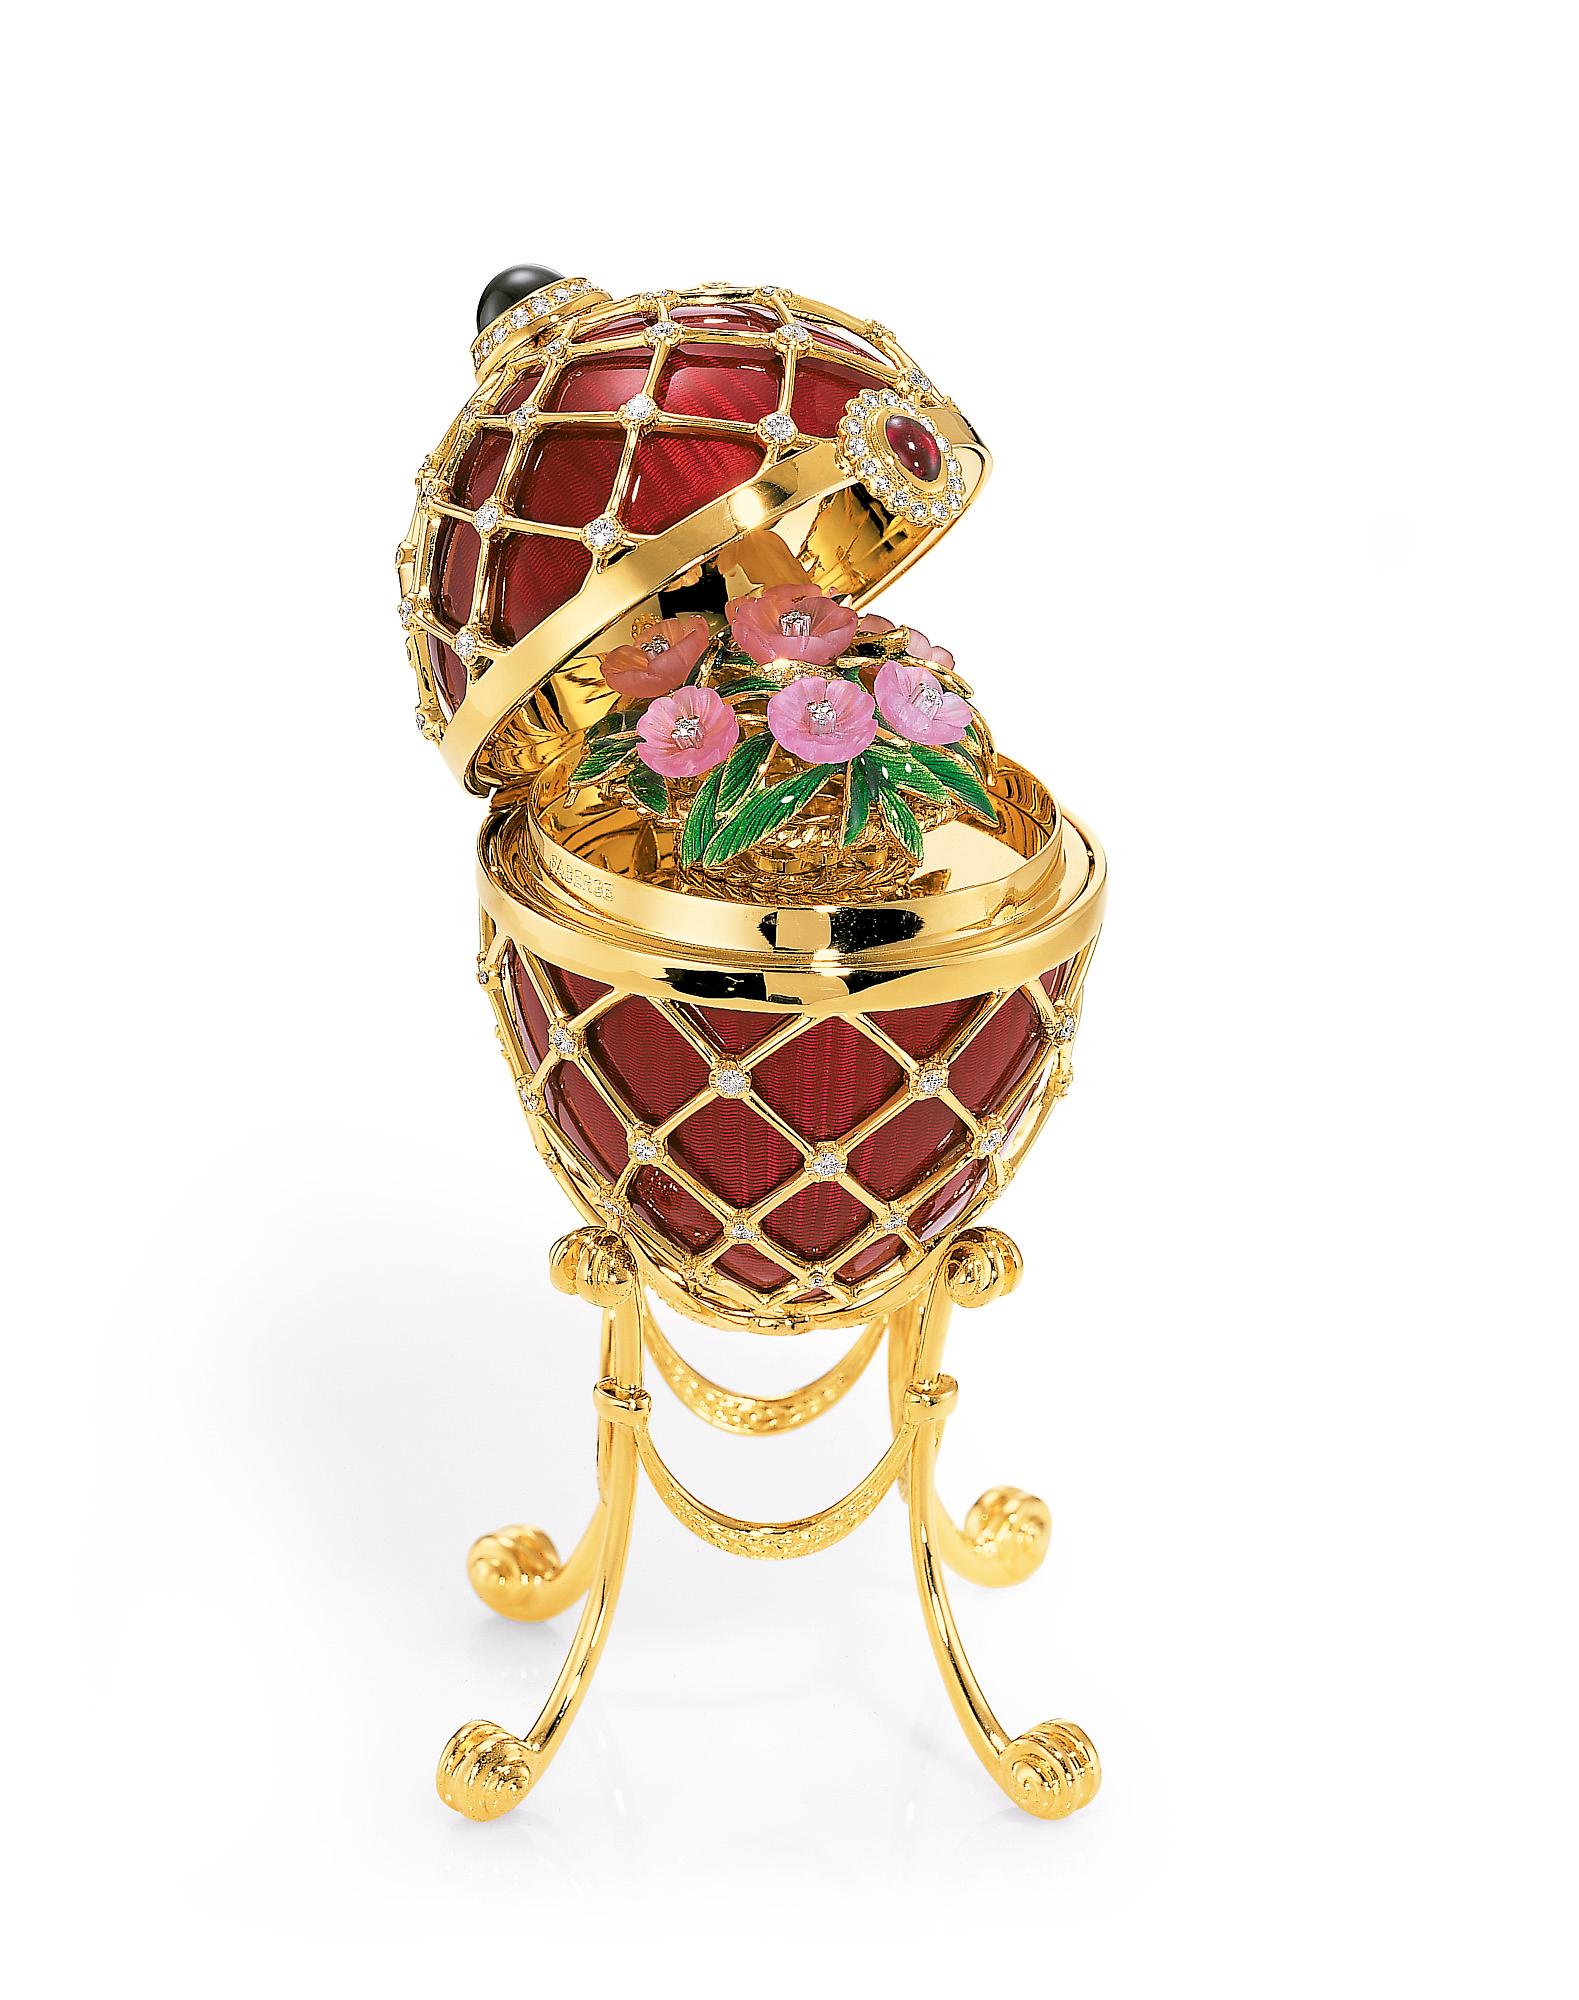 value of faberge eggs